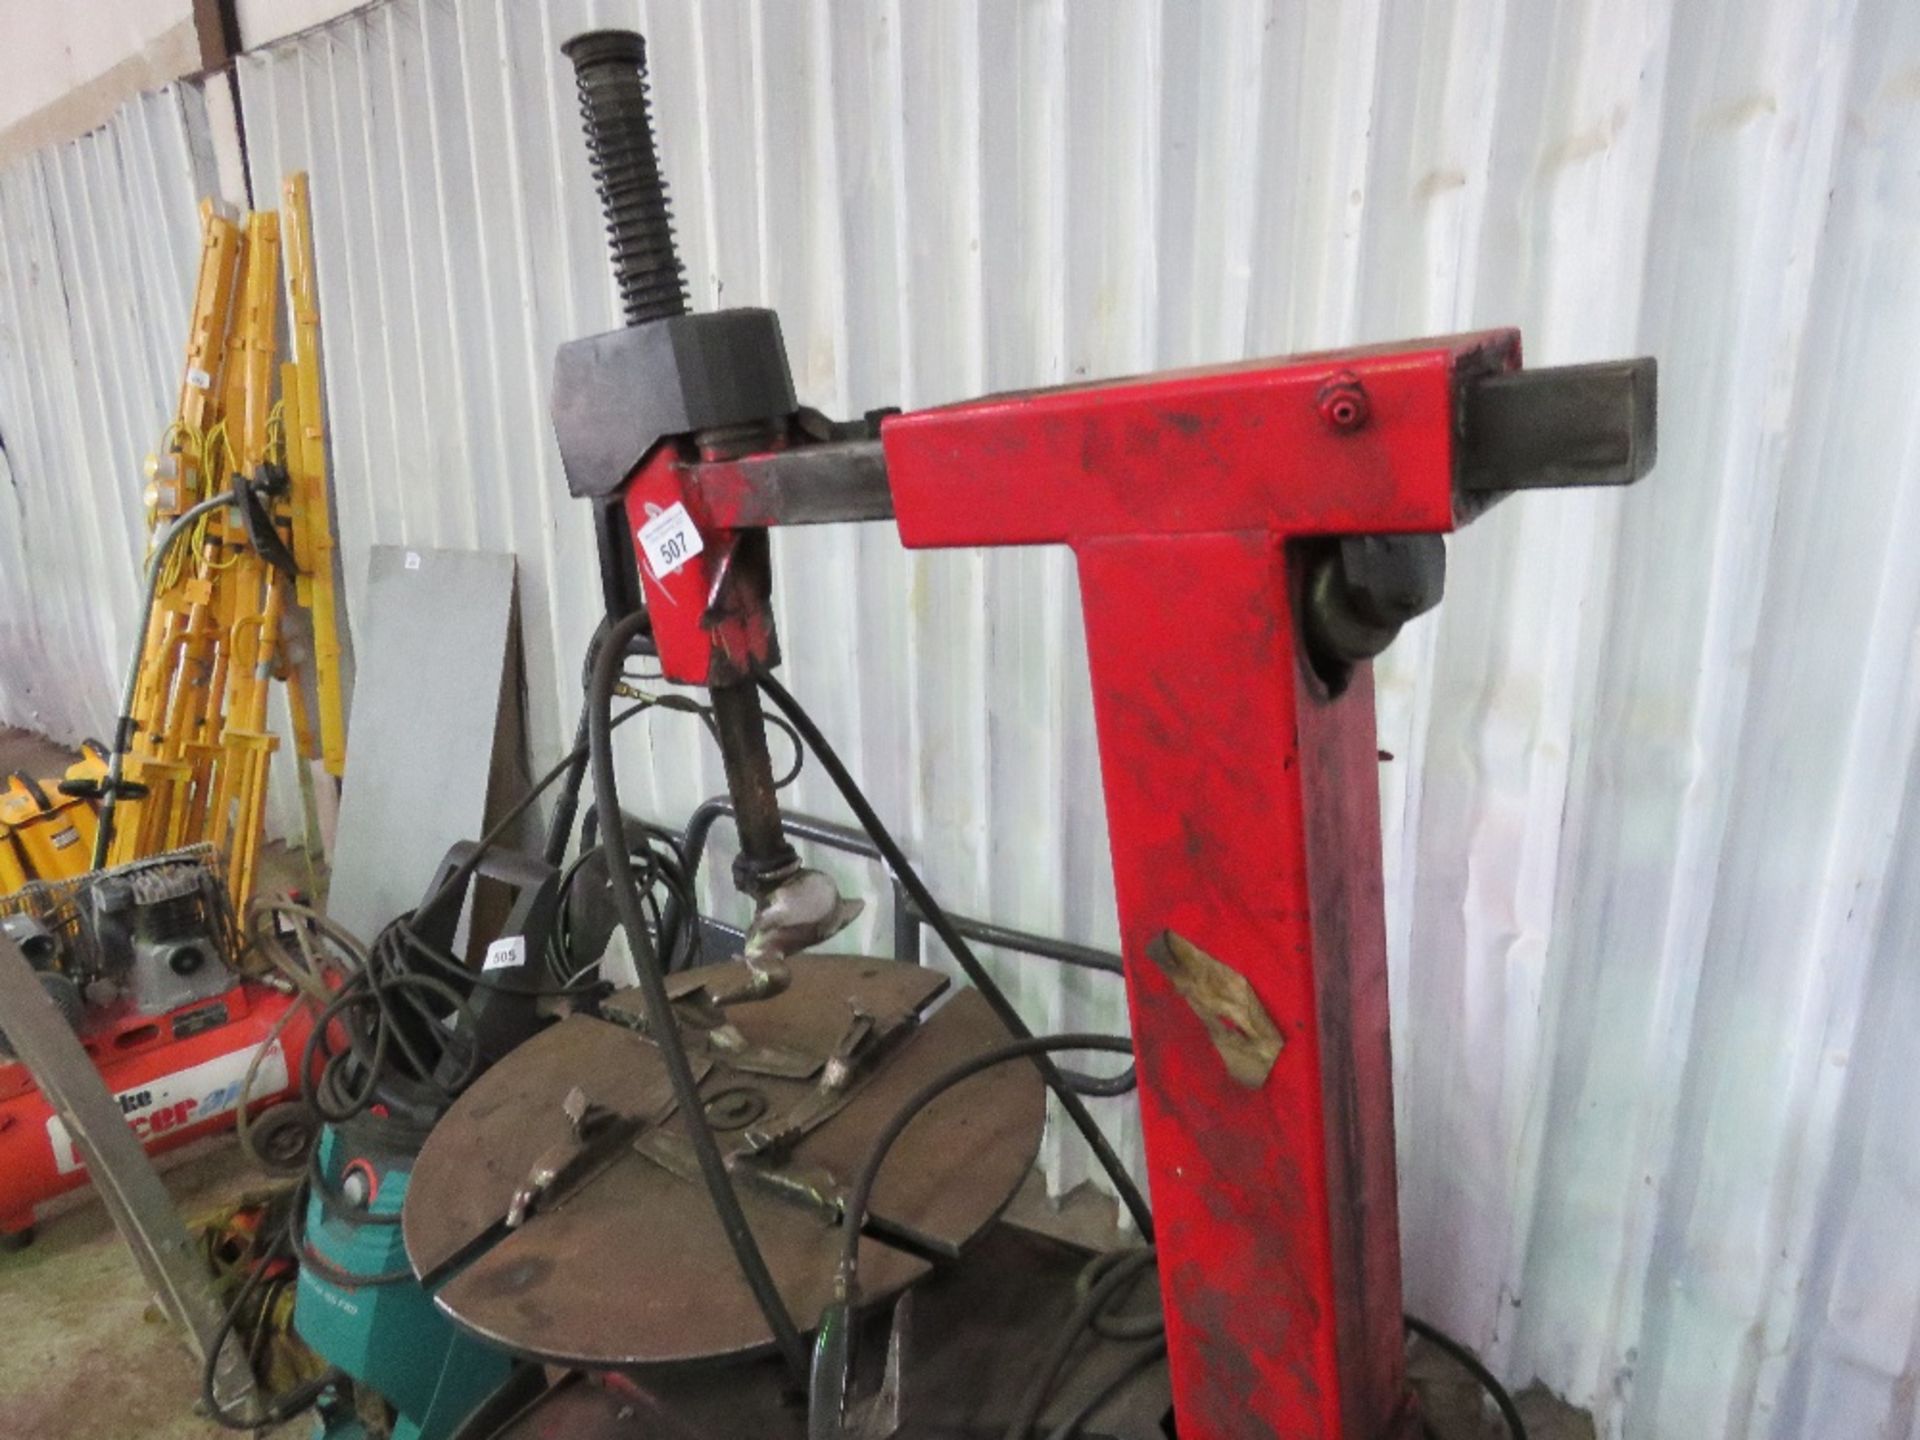 TYRE REMOVING MACHINE, 240VOLT POWERED. WORKING WHEN REMOVED FROM GARAGE LIQUIDATION. THIS LOT IS - Image 8 of 8